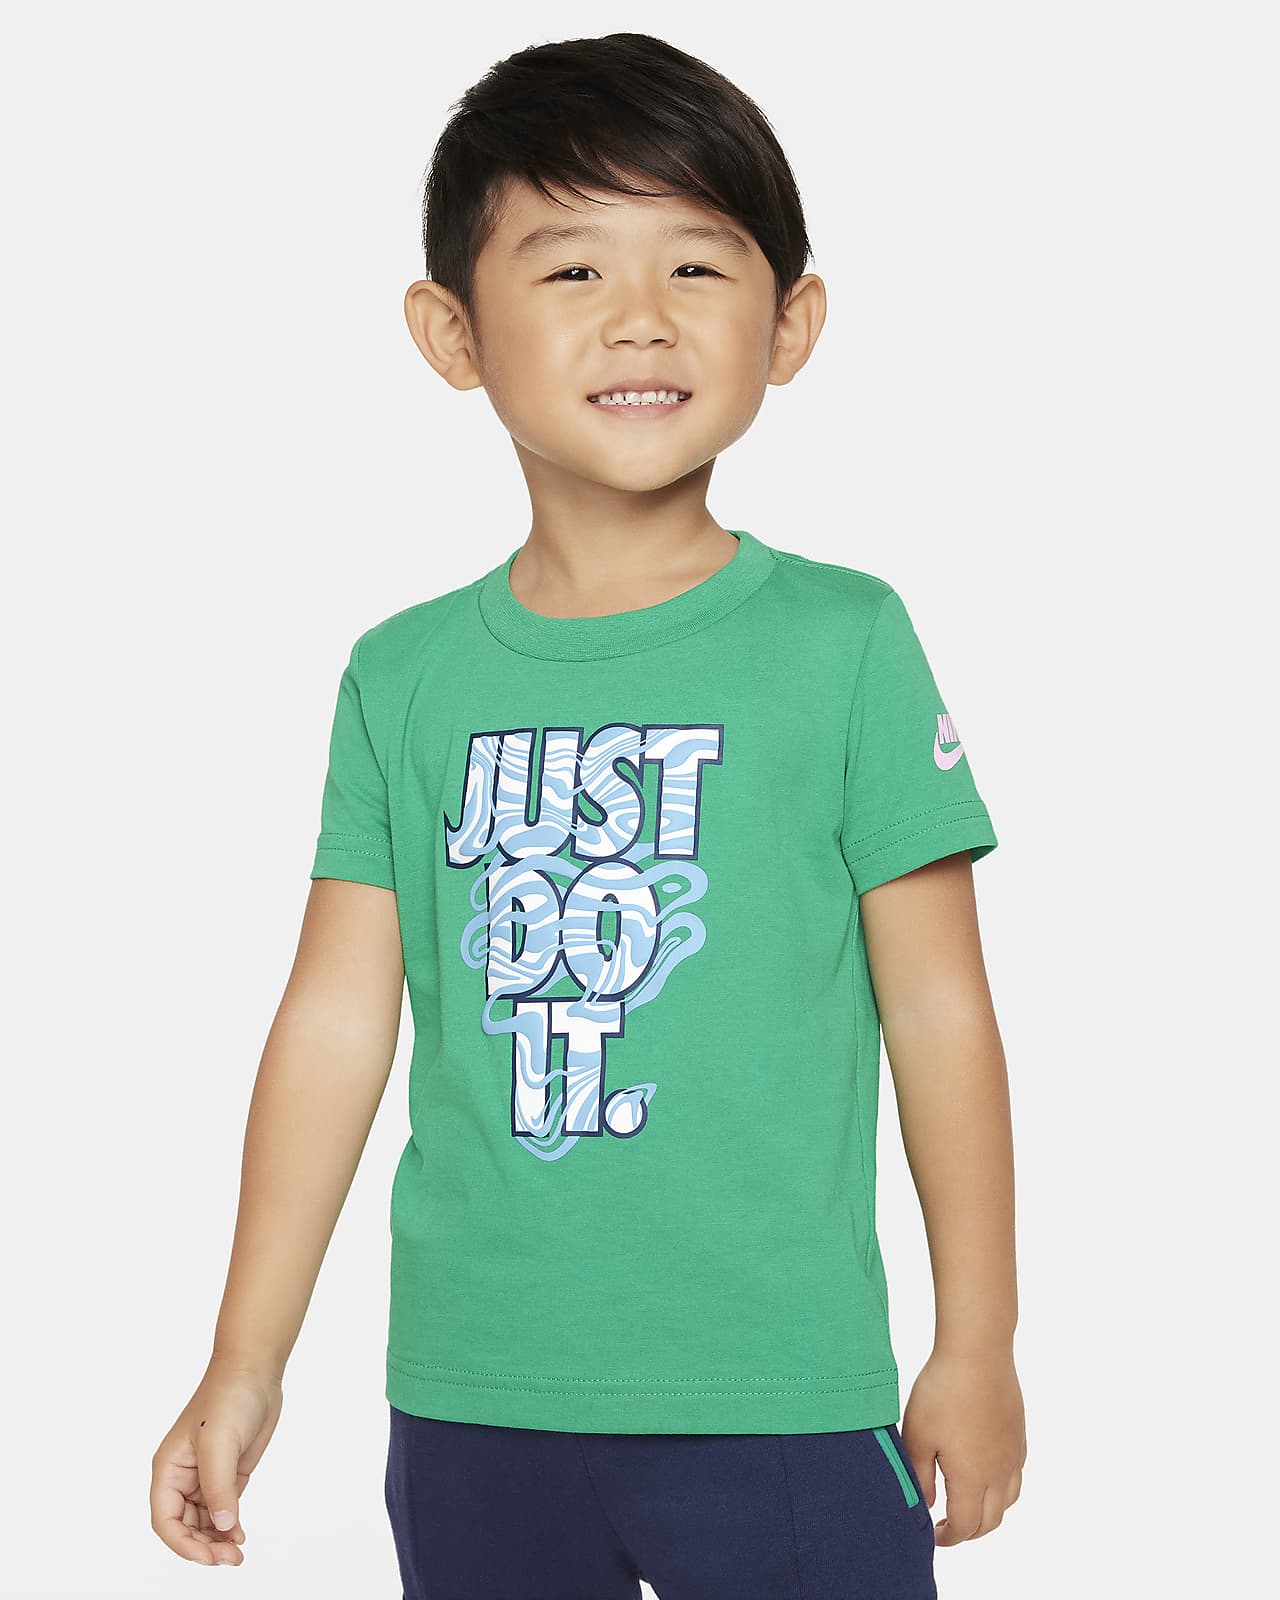 Nike "Just Do It" Toddler Graphic T-Shirt